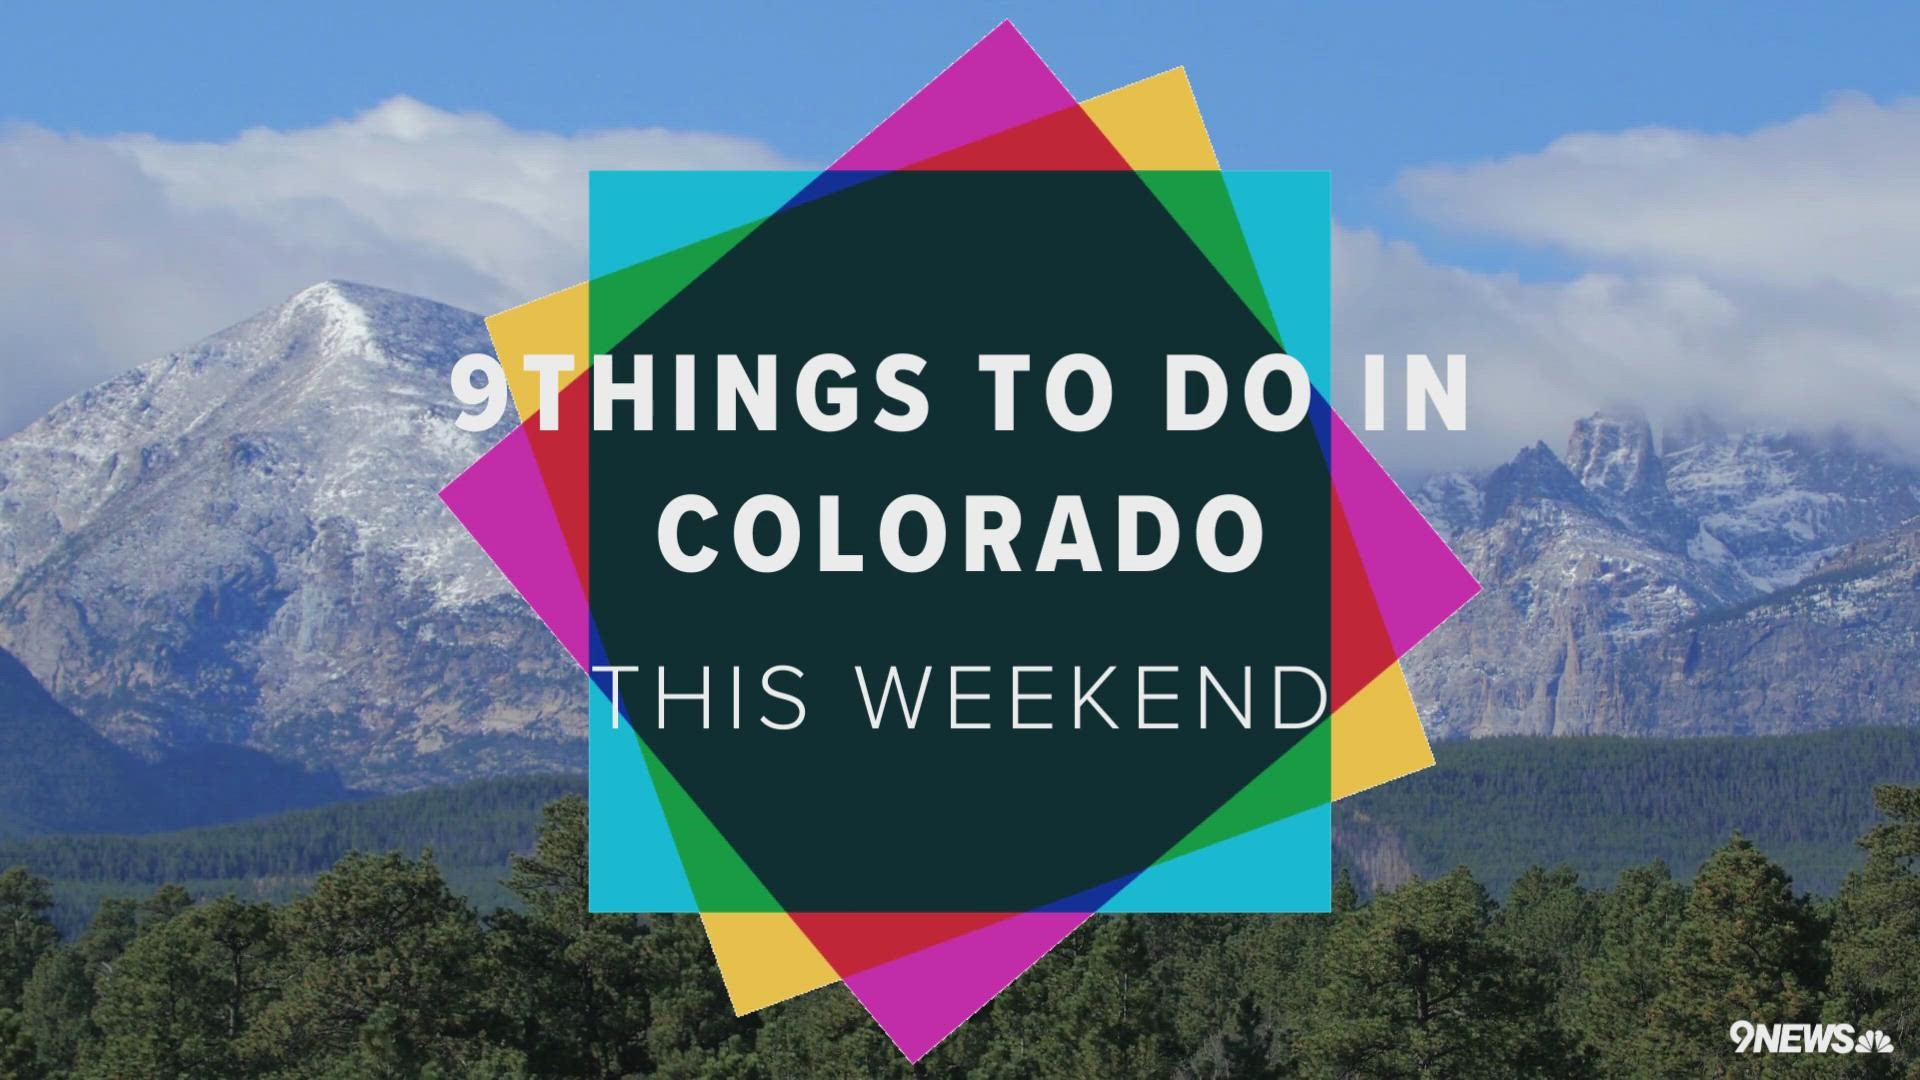 Colorado kicks off May with Cinco de Mayo celebrations, Kentucky Derby parties and Mother's Day gatherings.